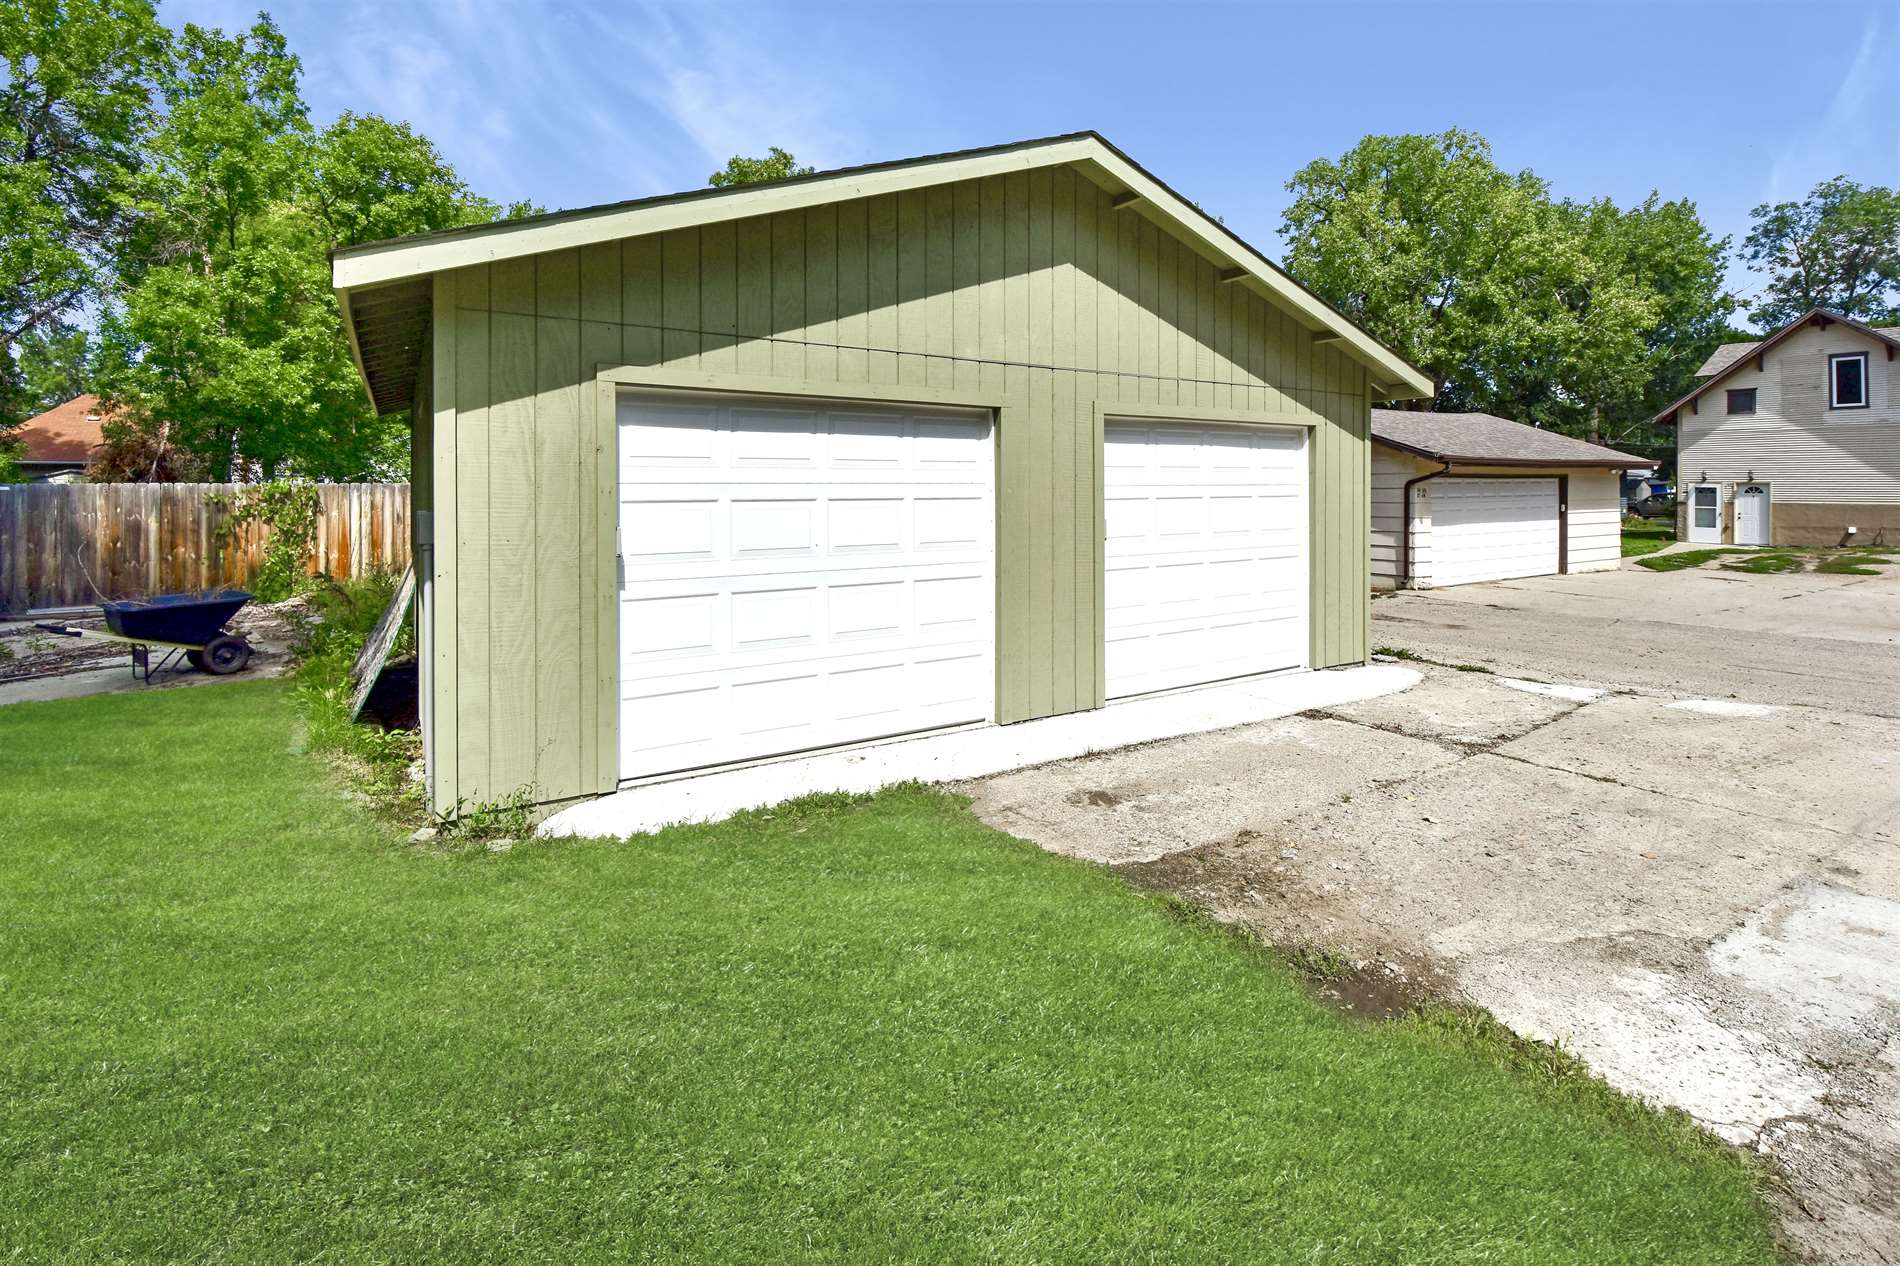 614 1st Ave NW, Minot, ND 58703